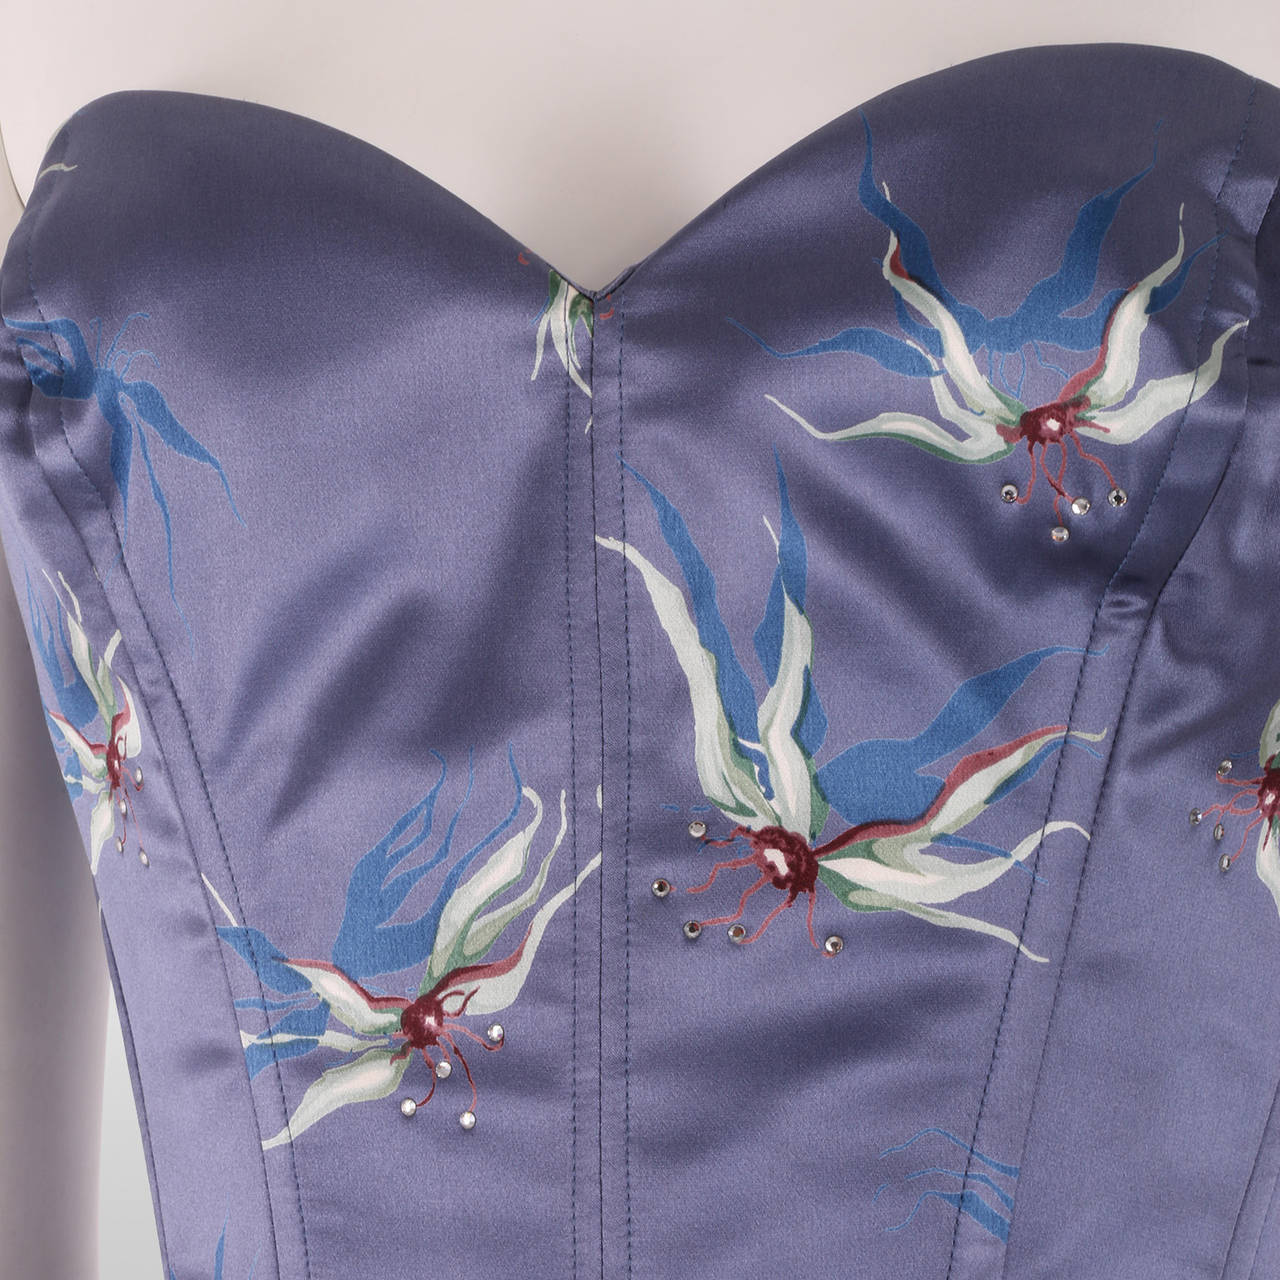 This beautiful satin blue with flower embroidery corset, is part of Chloe's Spring/Summer 1999 ready to wear collection. It was also showcased as part of their advertising campaign in 1999. The same print was worn by Gisele Bundchen on the runway.